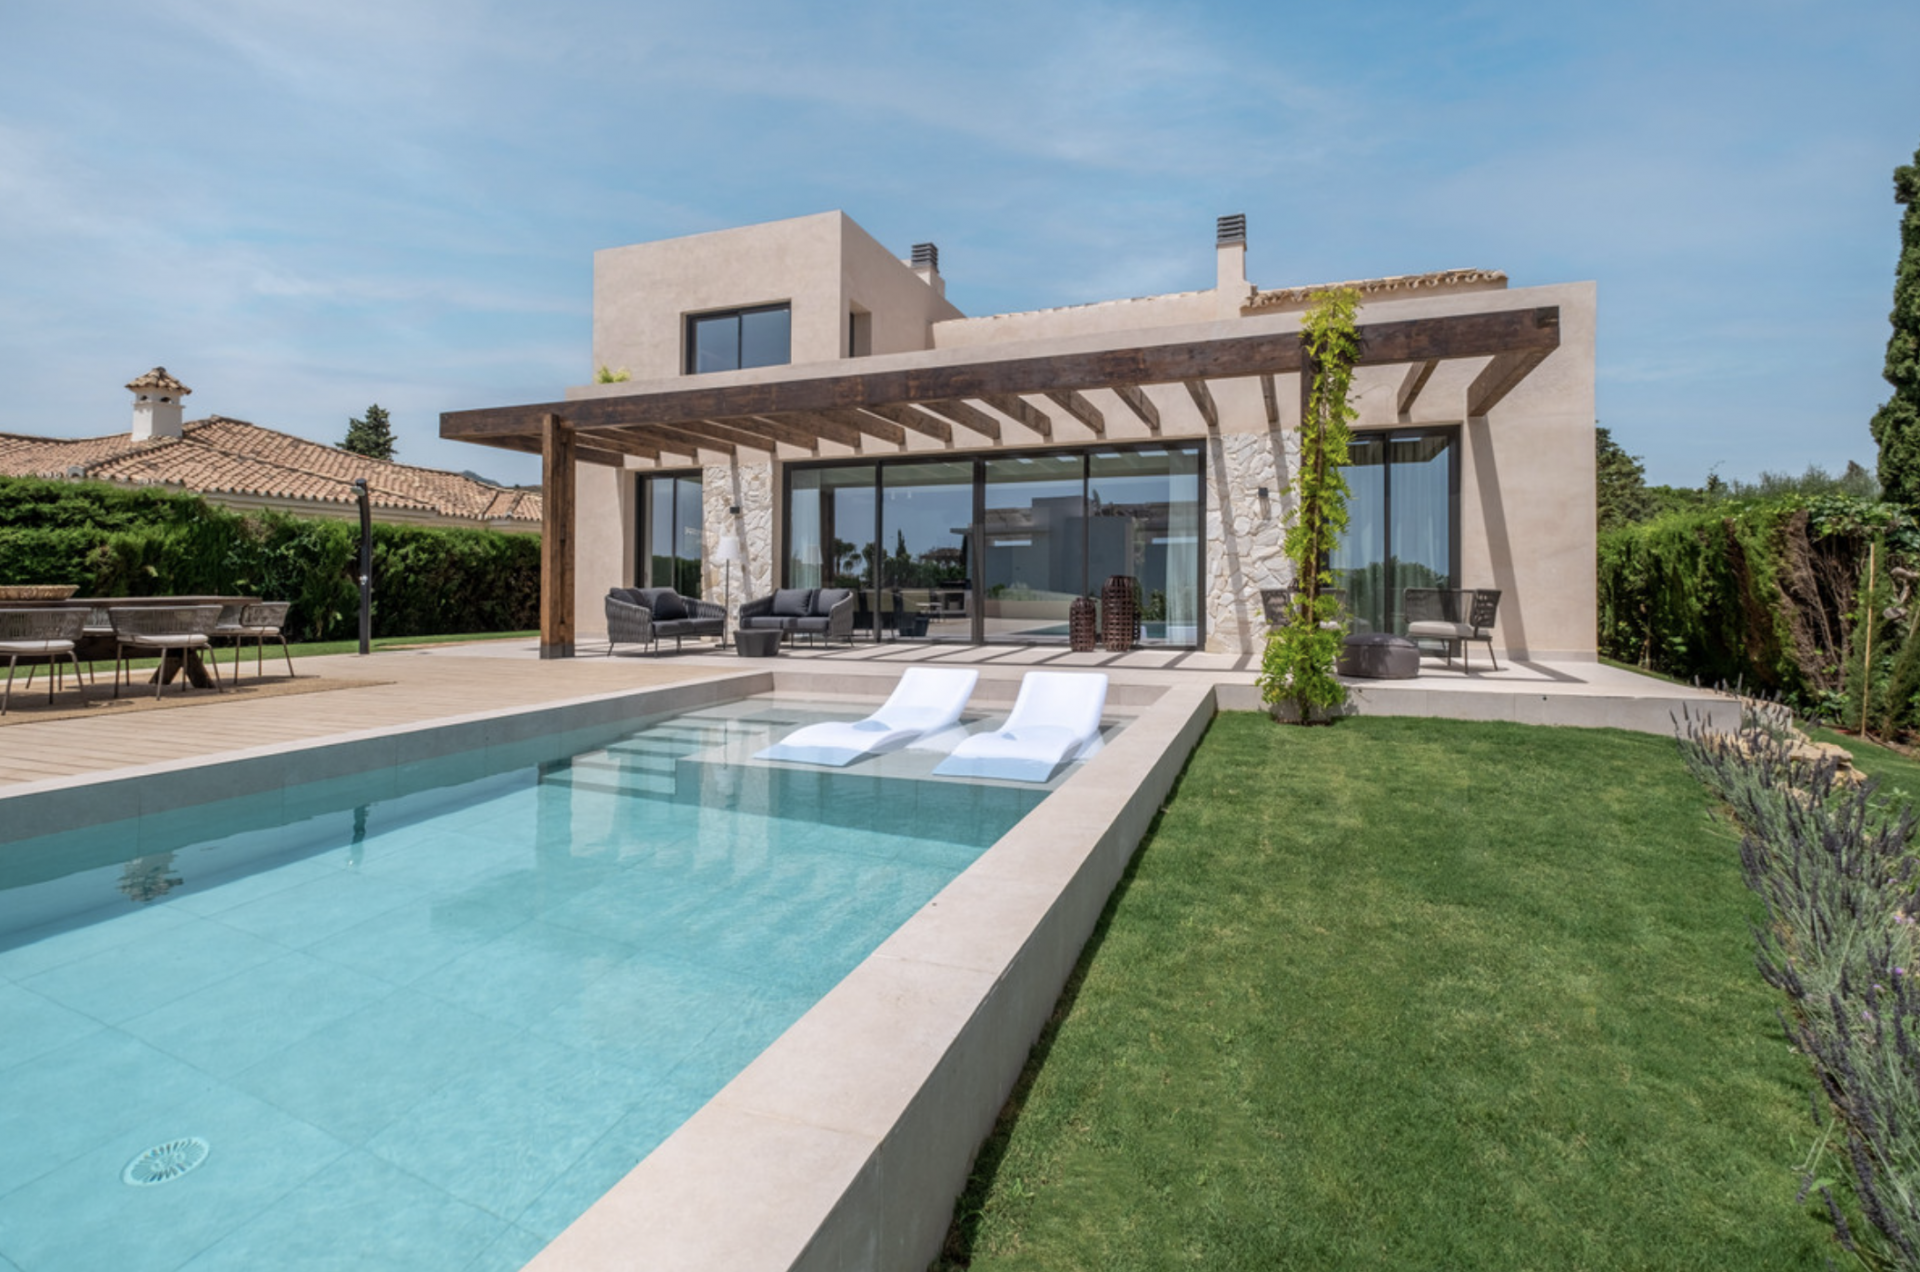 Hidden gem renovated to the highest standards in El Paraiso Alto next to a golf course and a short drive from Puerto Banus and the beach